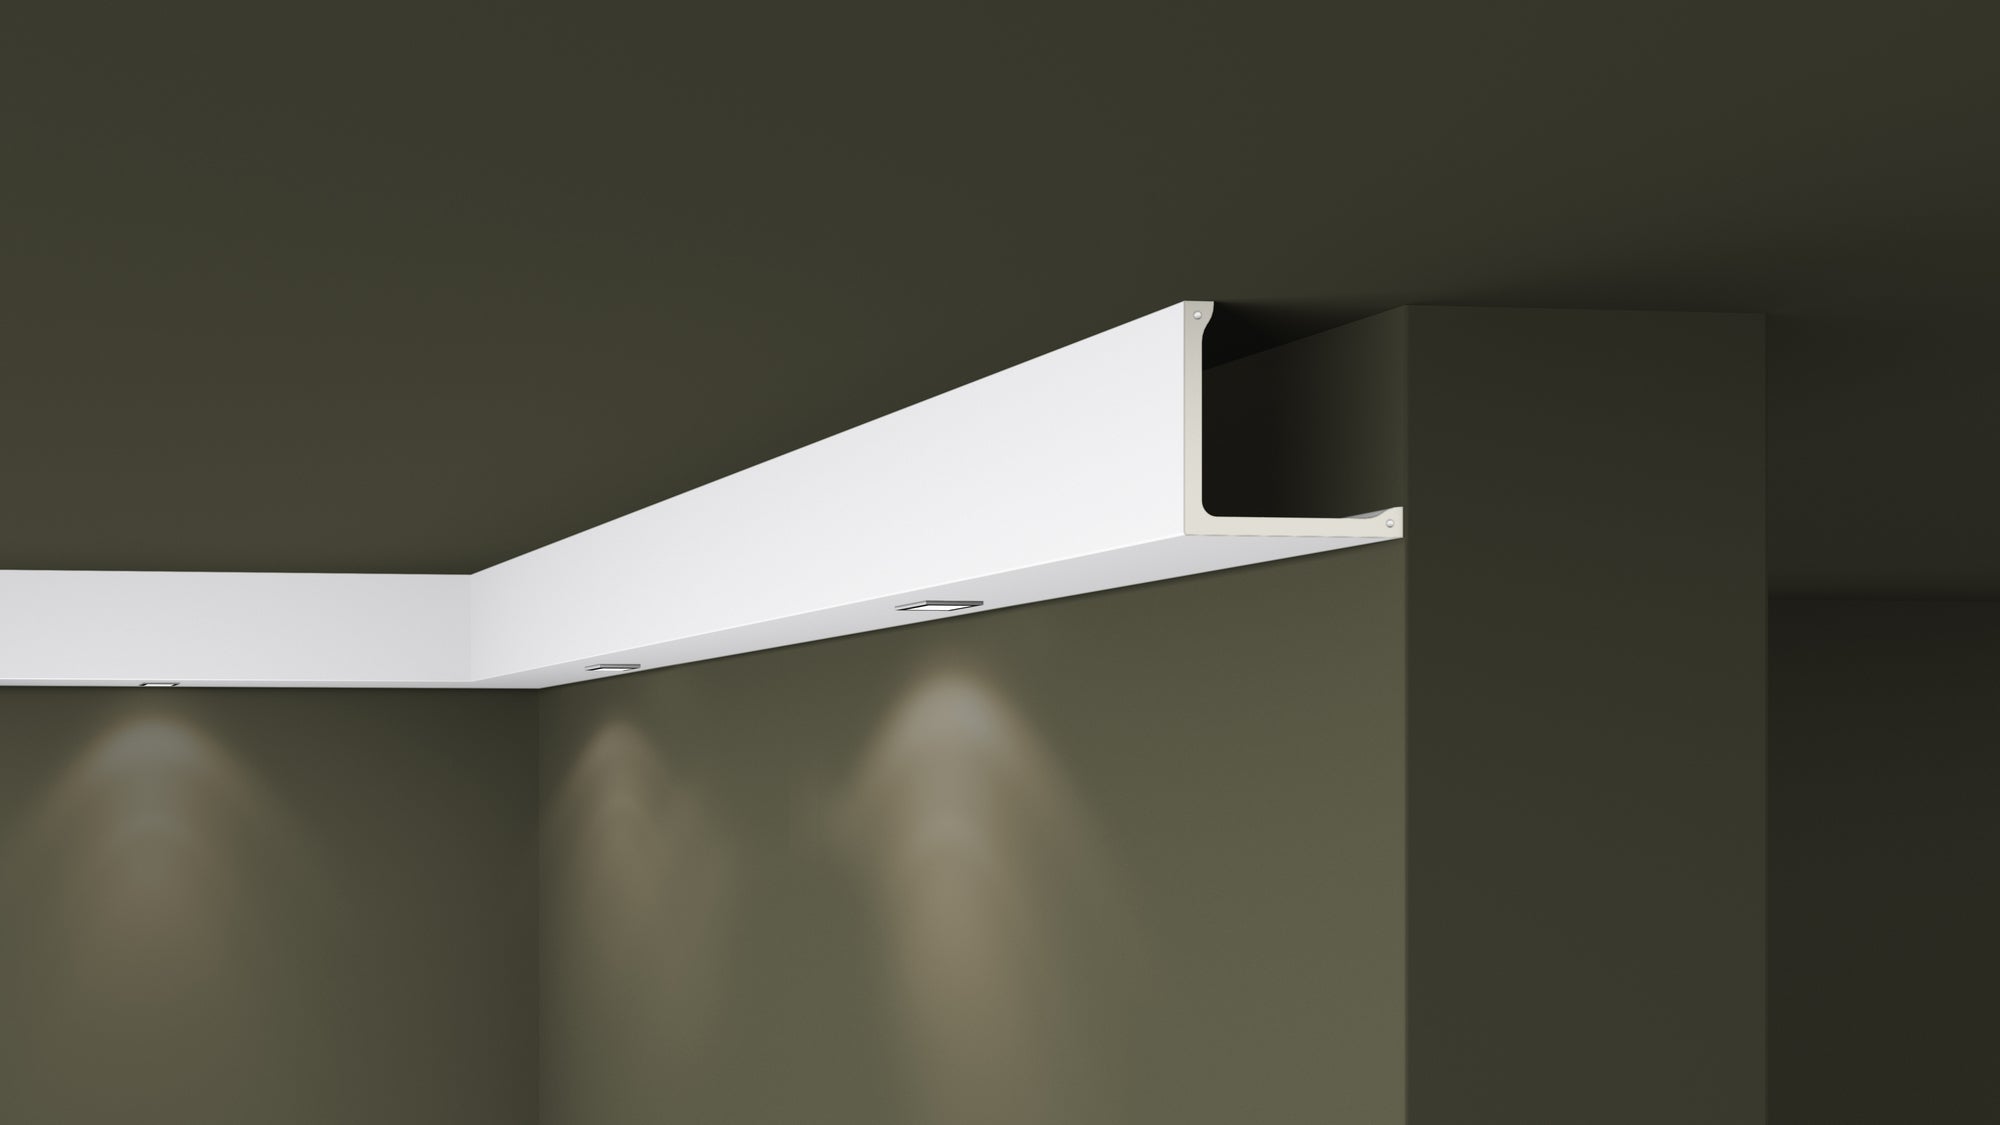 L1 ARSTYL 2M COVING LIGHTING SOLUTION - Covings | DecorMania